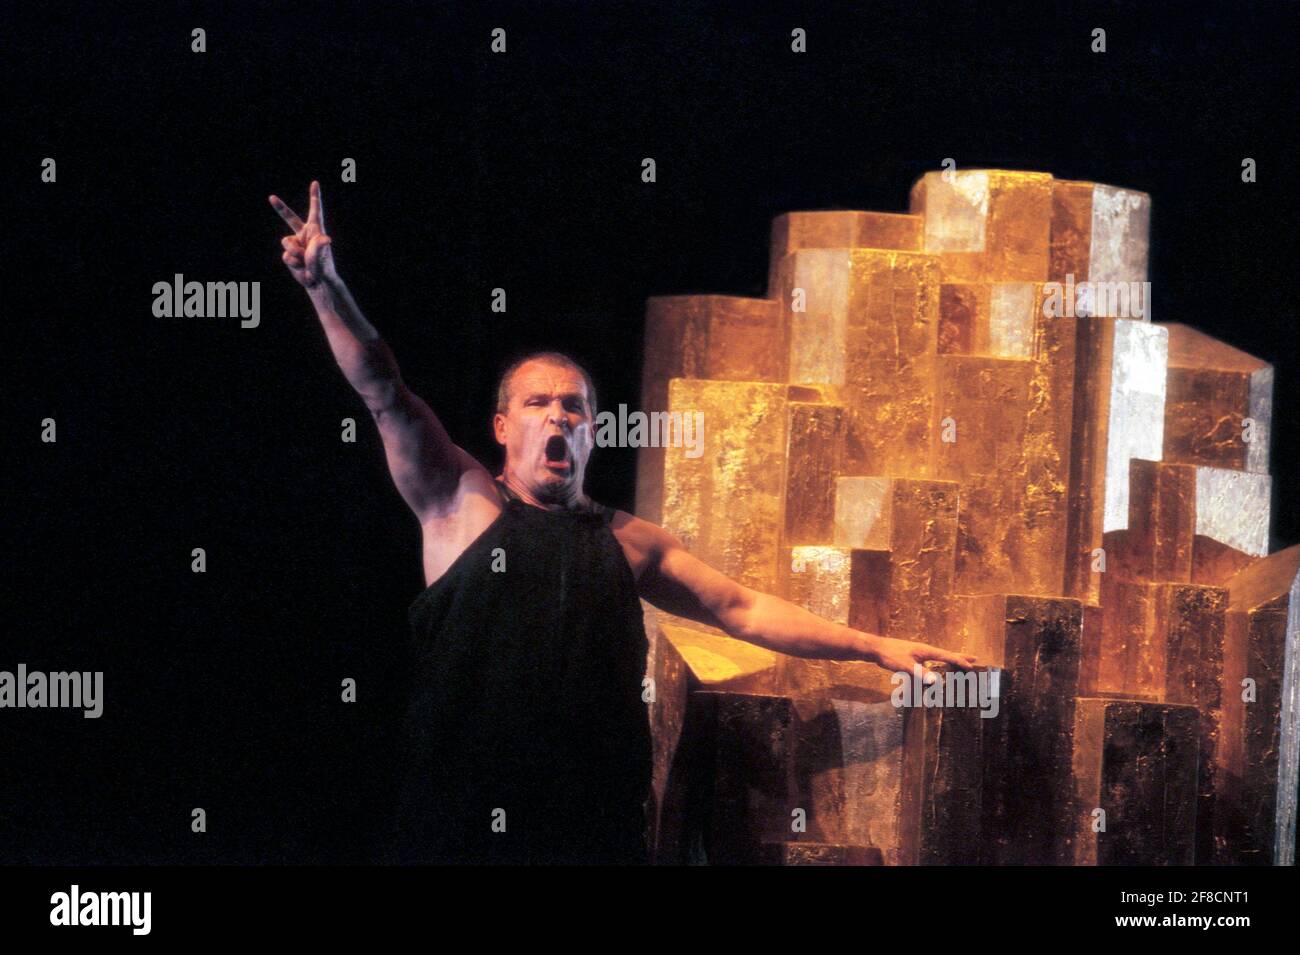 Hartmut Welker (Alberich) in DAS RHEINGOLD by Wagner at the Theatre Royal, Norwich, England  18/06/1997 a Den Norske Opera production  conductor: Heinz Fricker  design: Kathrine Hysing  lighting: John Bishop  movement: Claire Glaskin  director: Mike Ashman Stock Photo